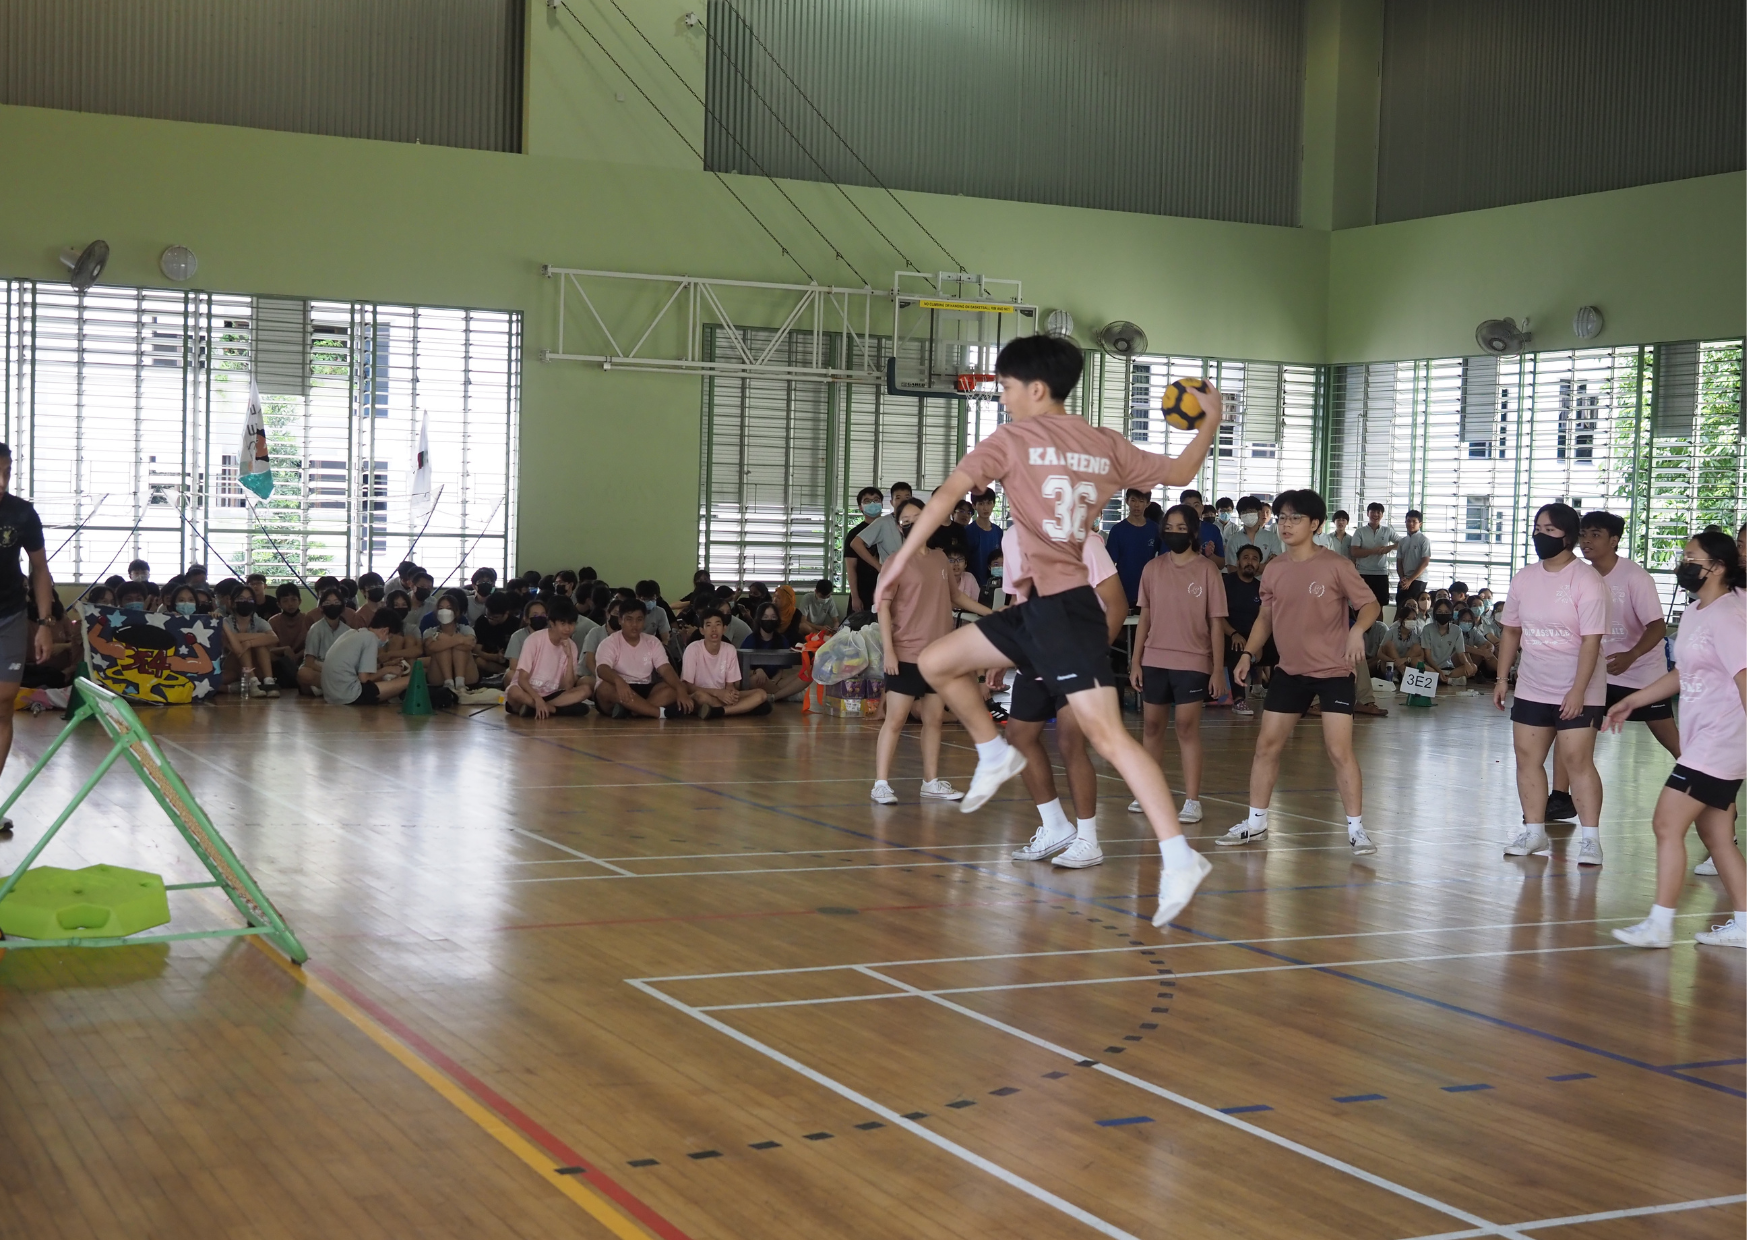 Inter-class sports and games - Tchoukball